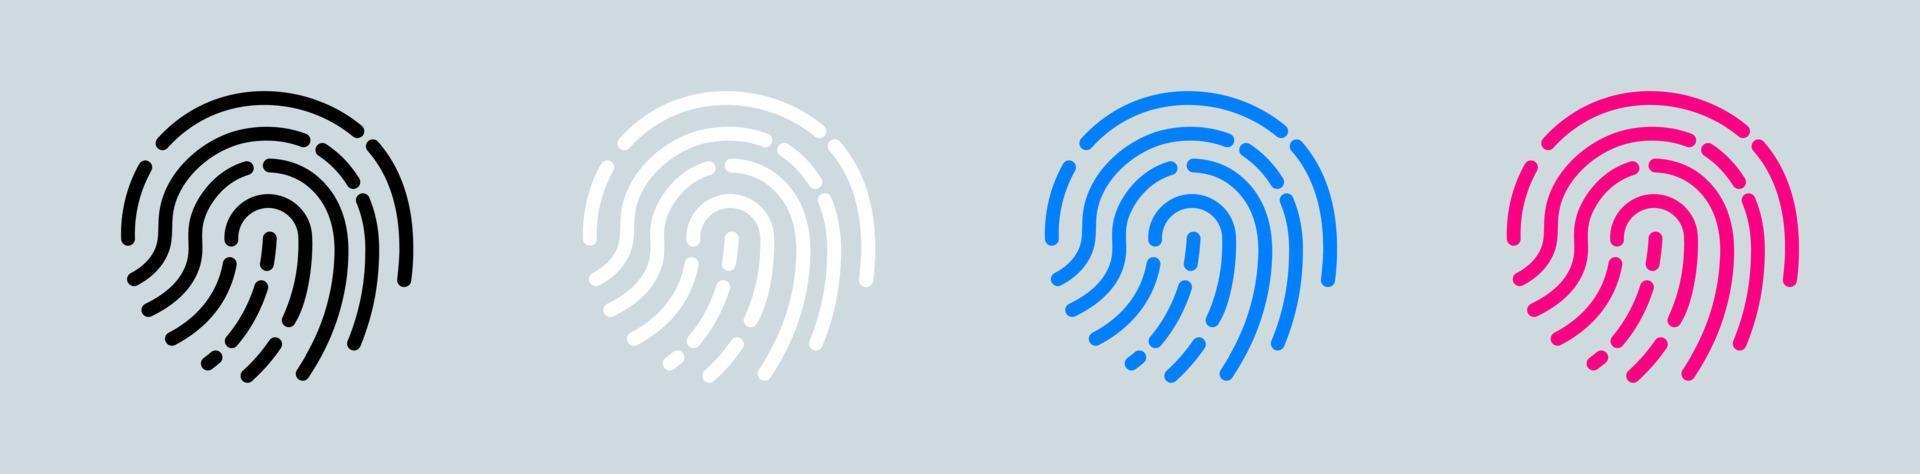 Touch id icon finger vector isolated on background. Set black and white fingerprint scanning icon sign.